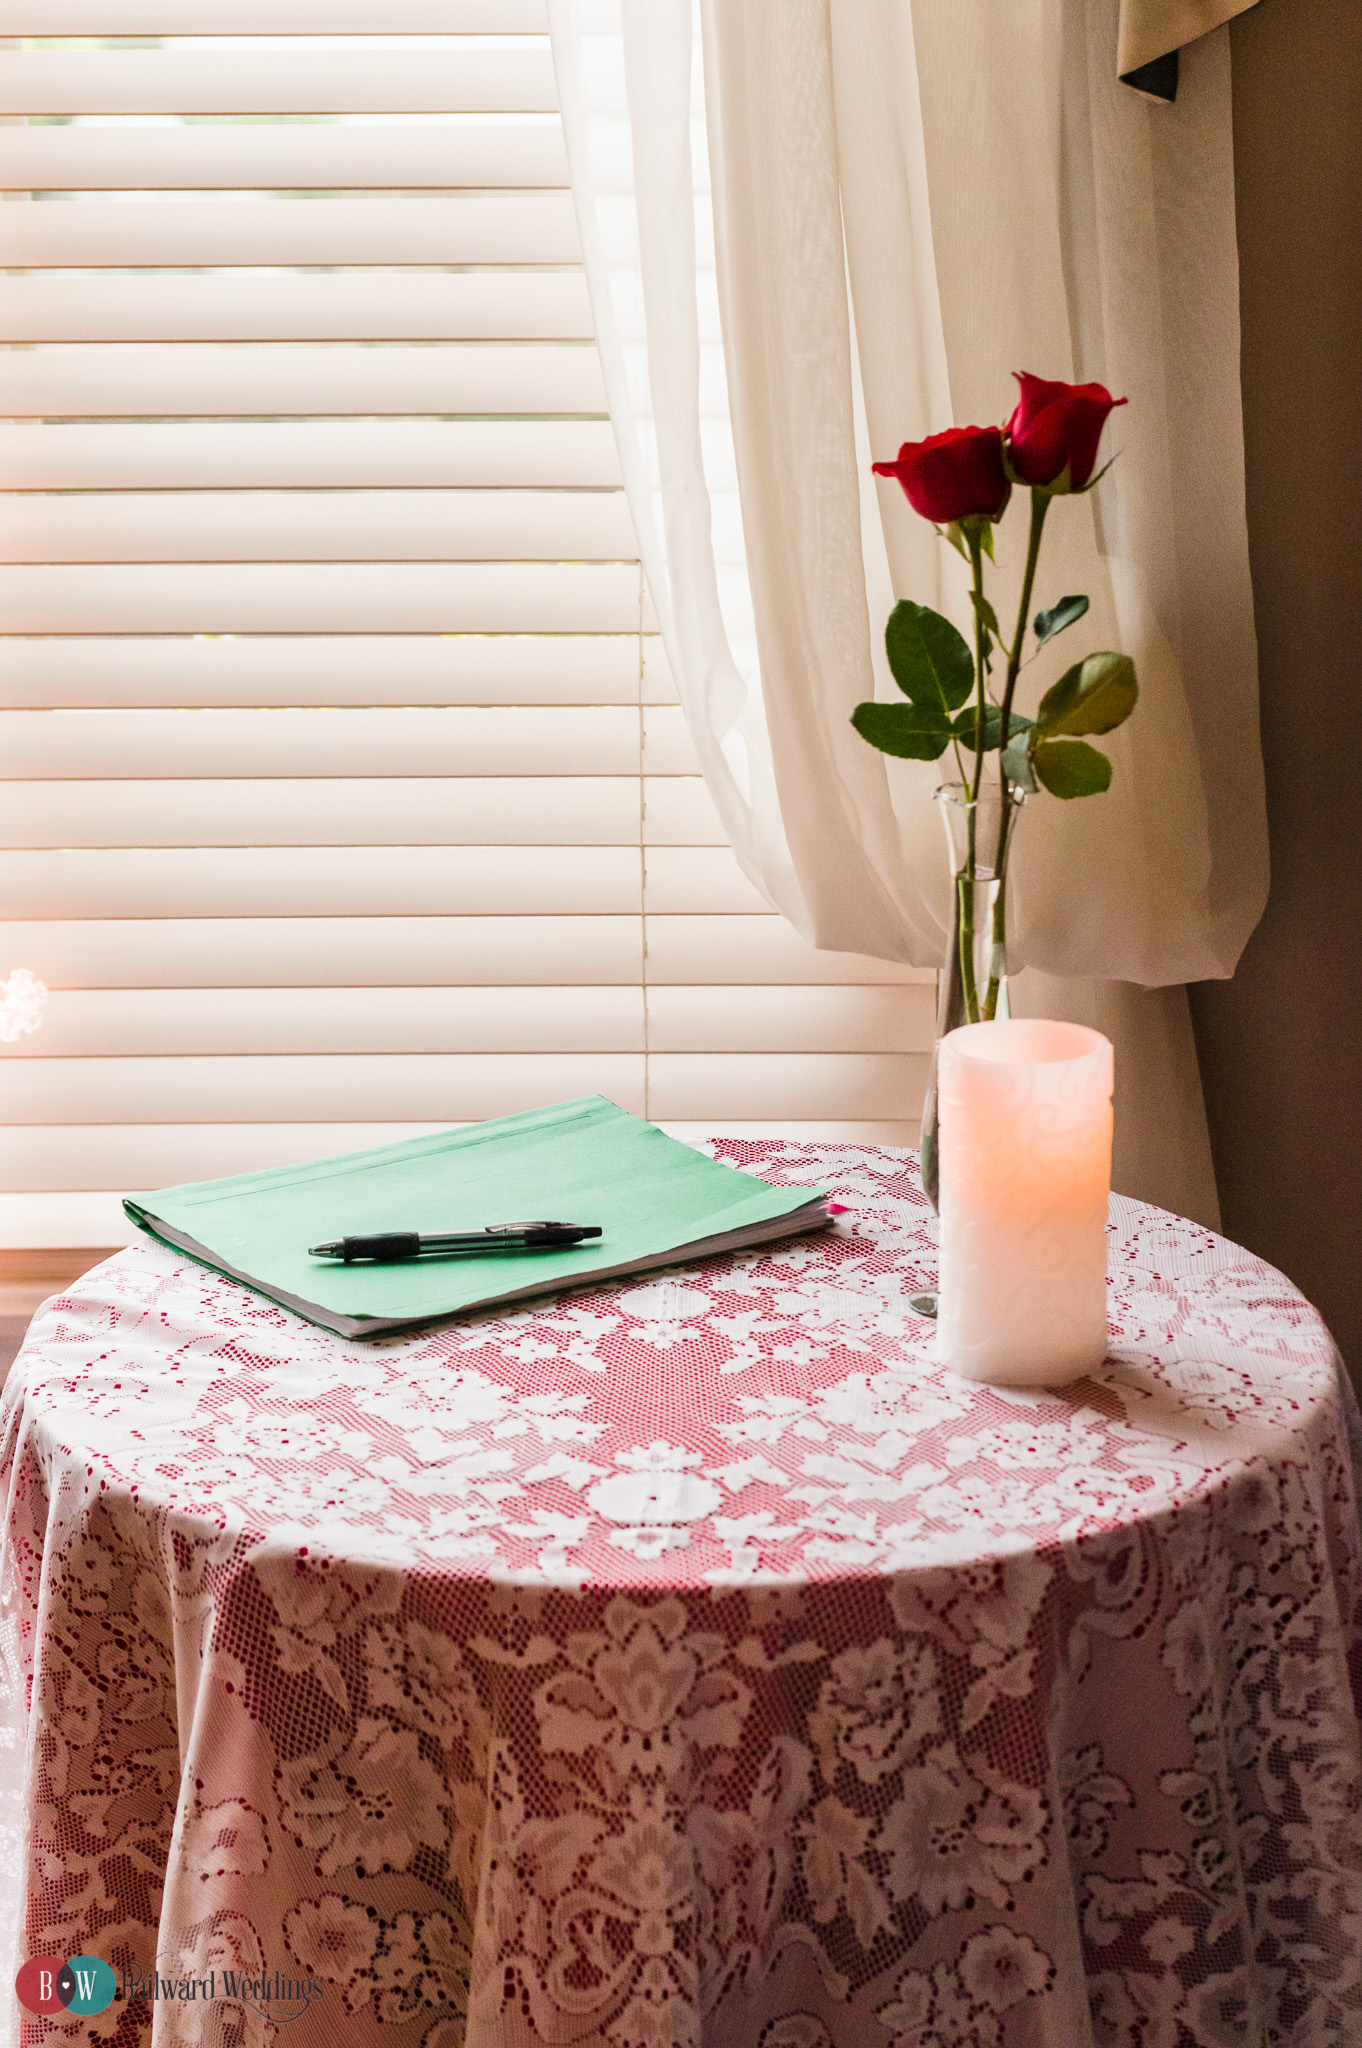 Rose on marriage paperwork signing table